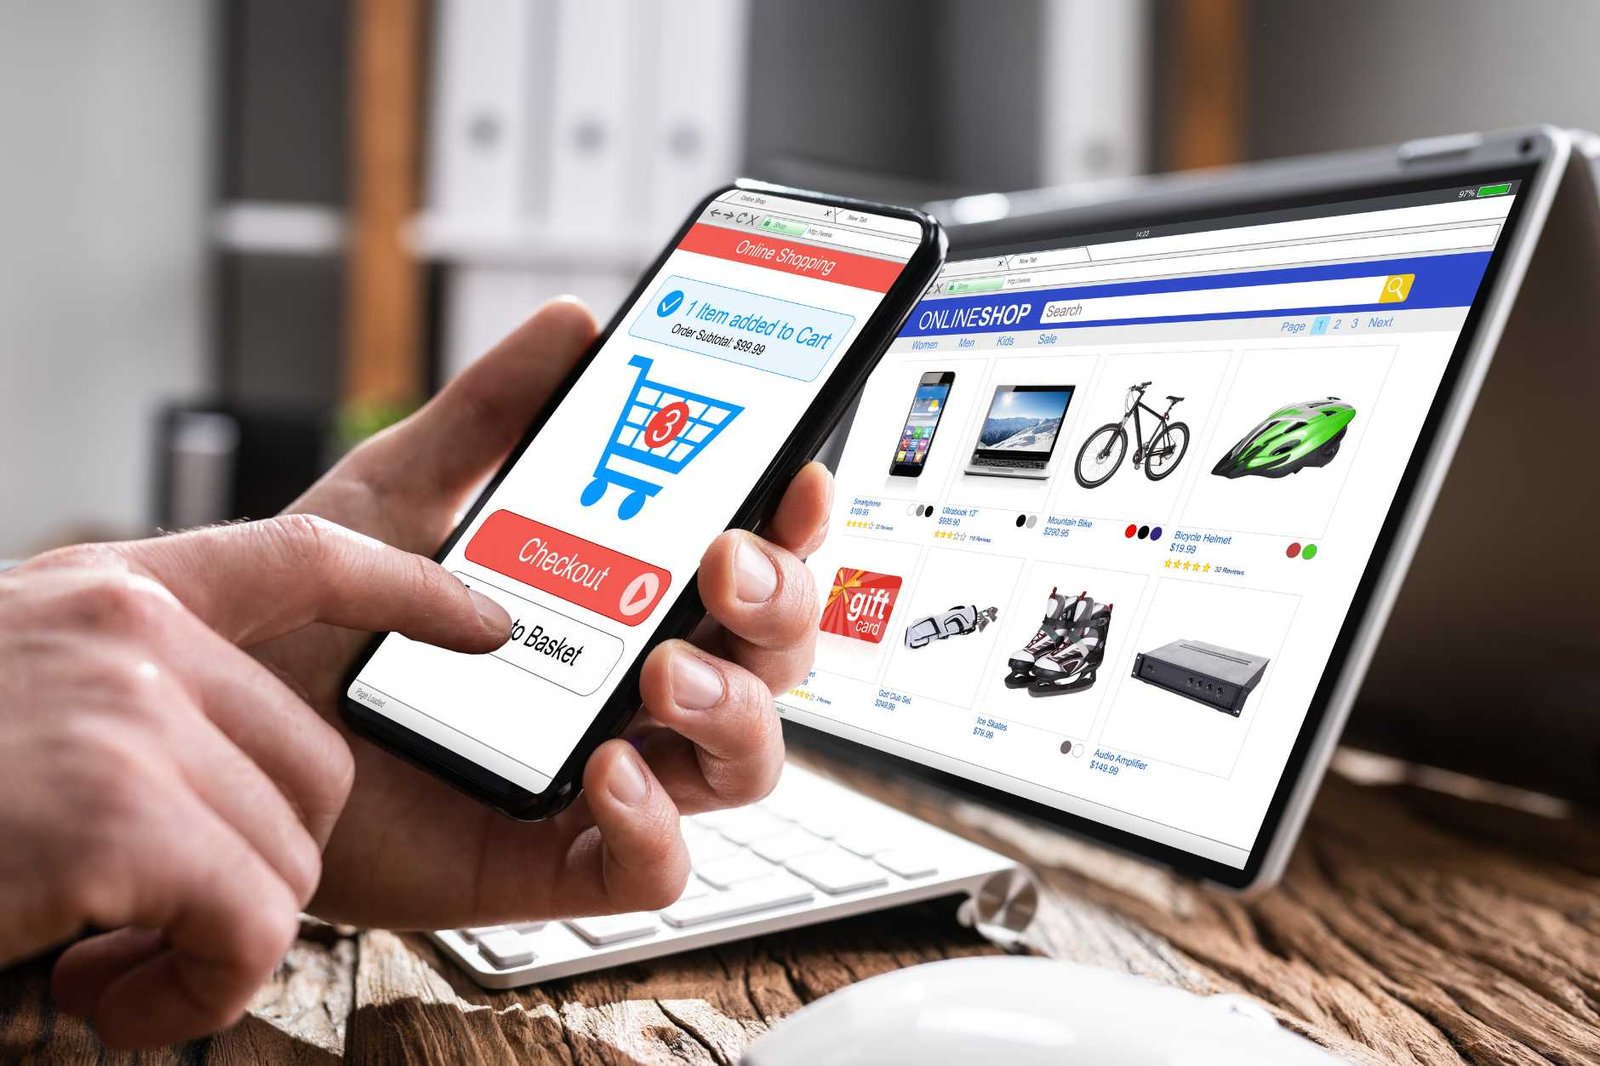 The Top 5 Trends in Ecommerce for the Coming Year